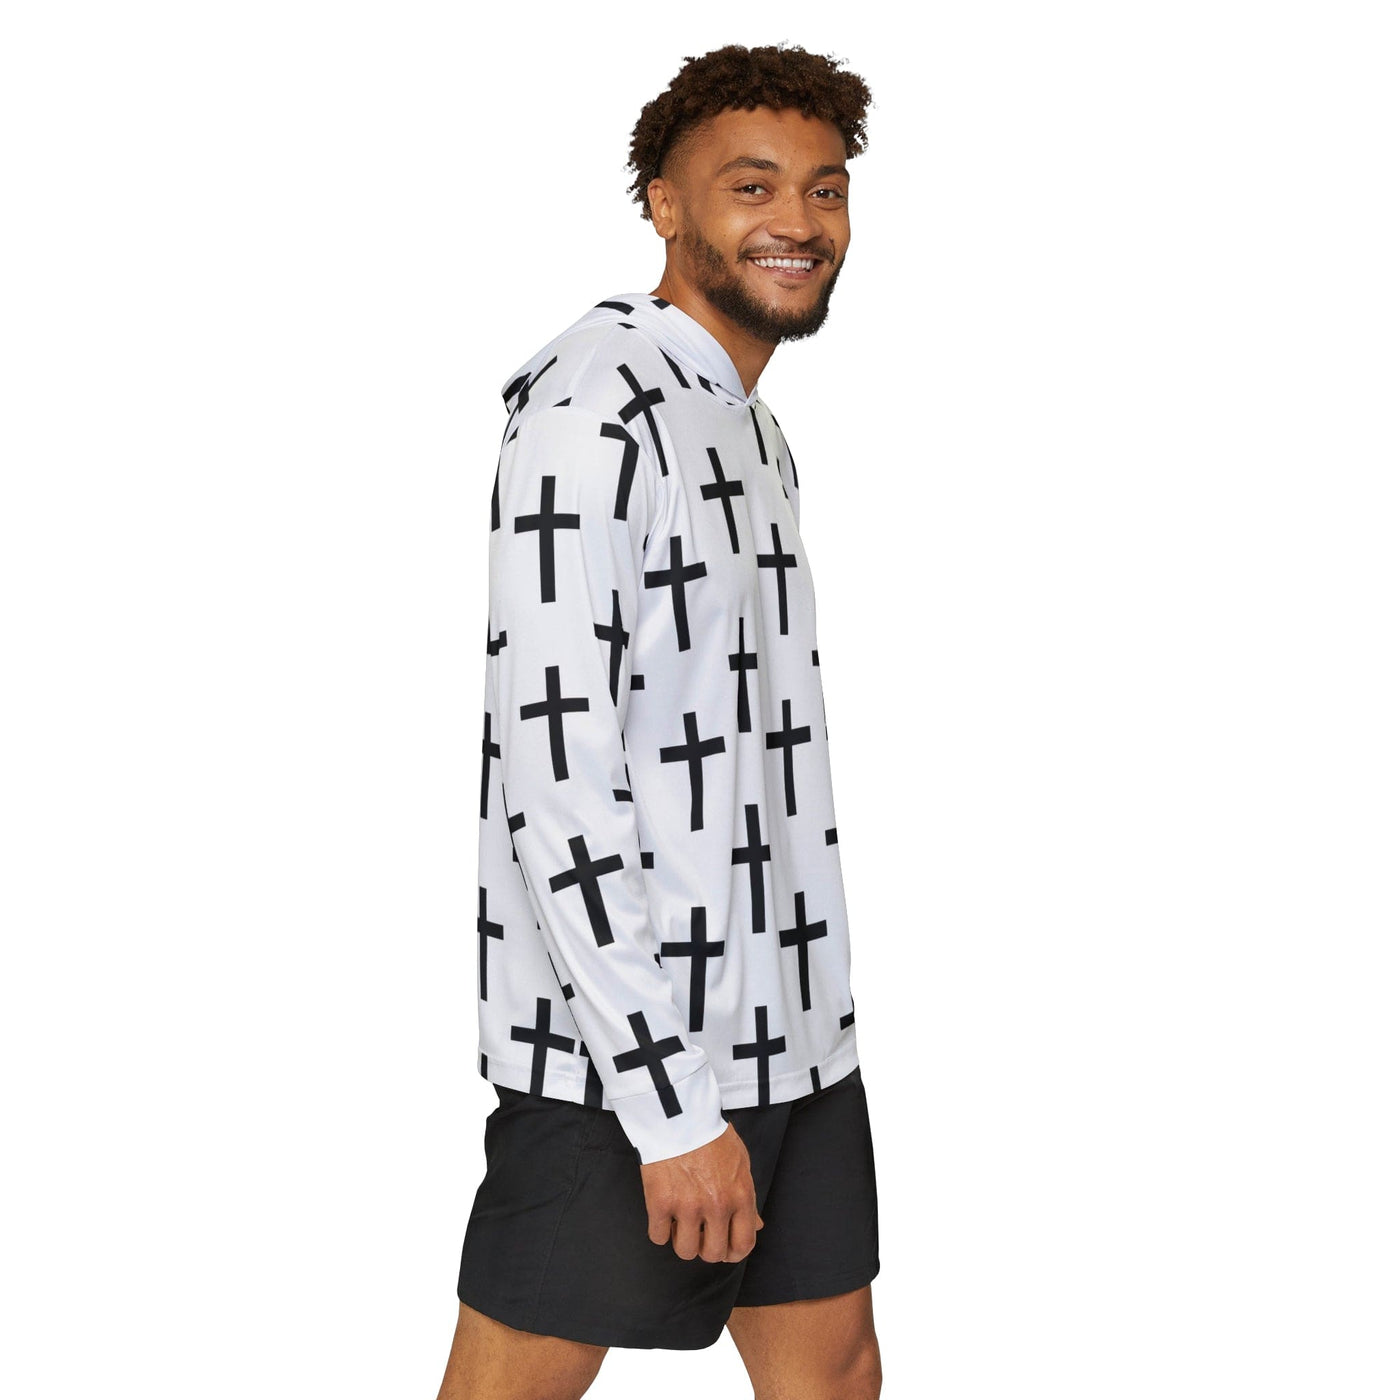 Mens Sports Graphic Hoodie Seamless Cross Pattern - All Over Prints